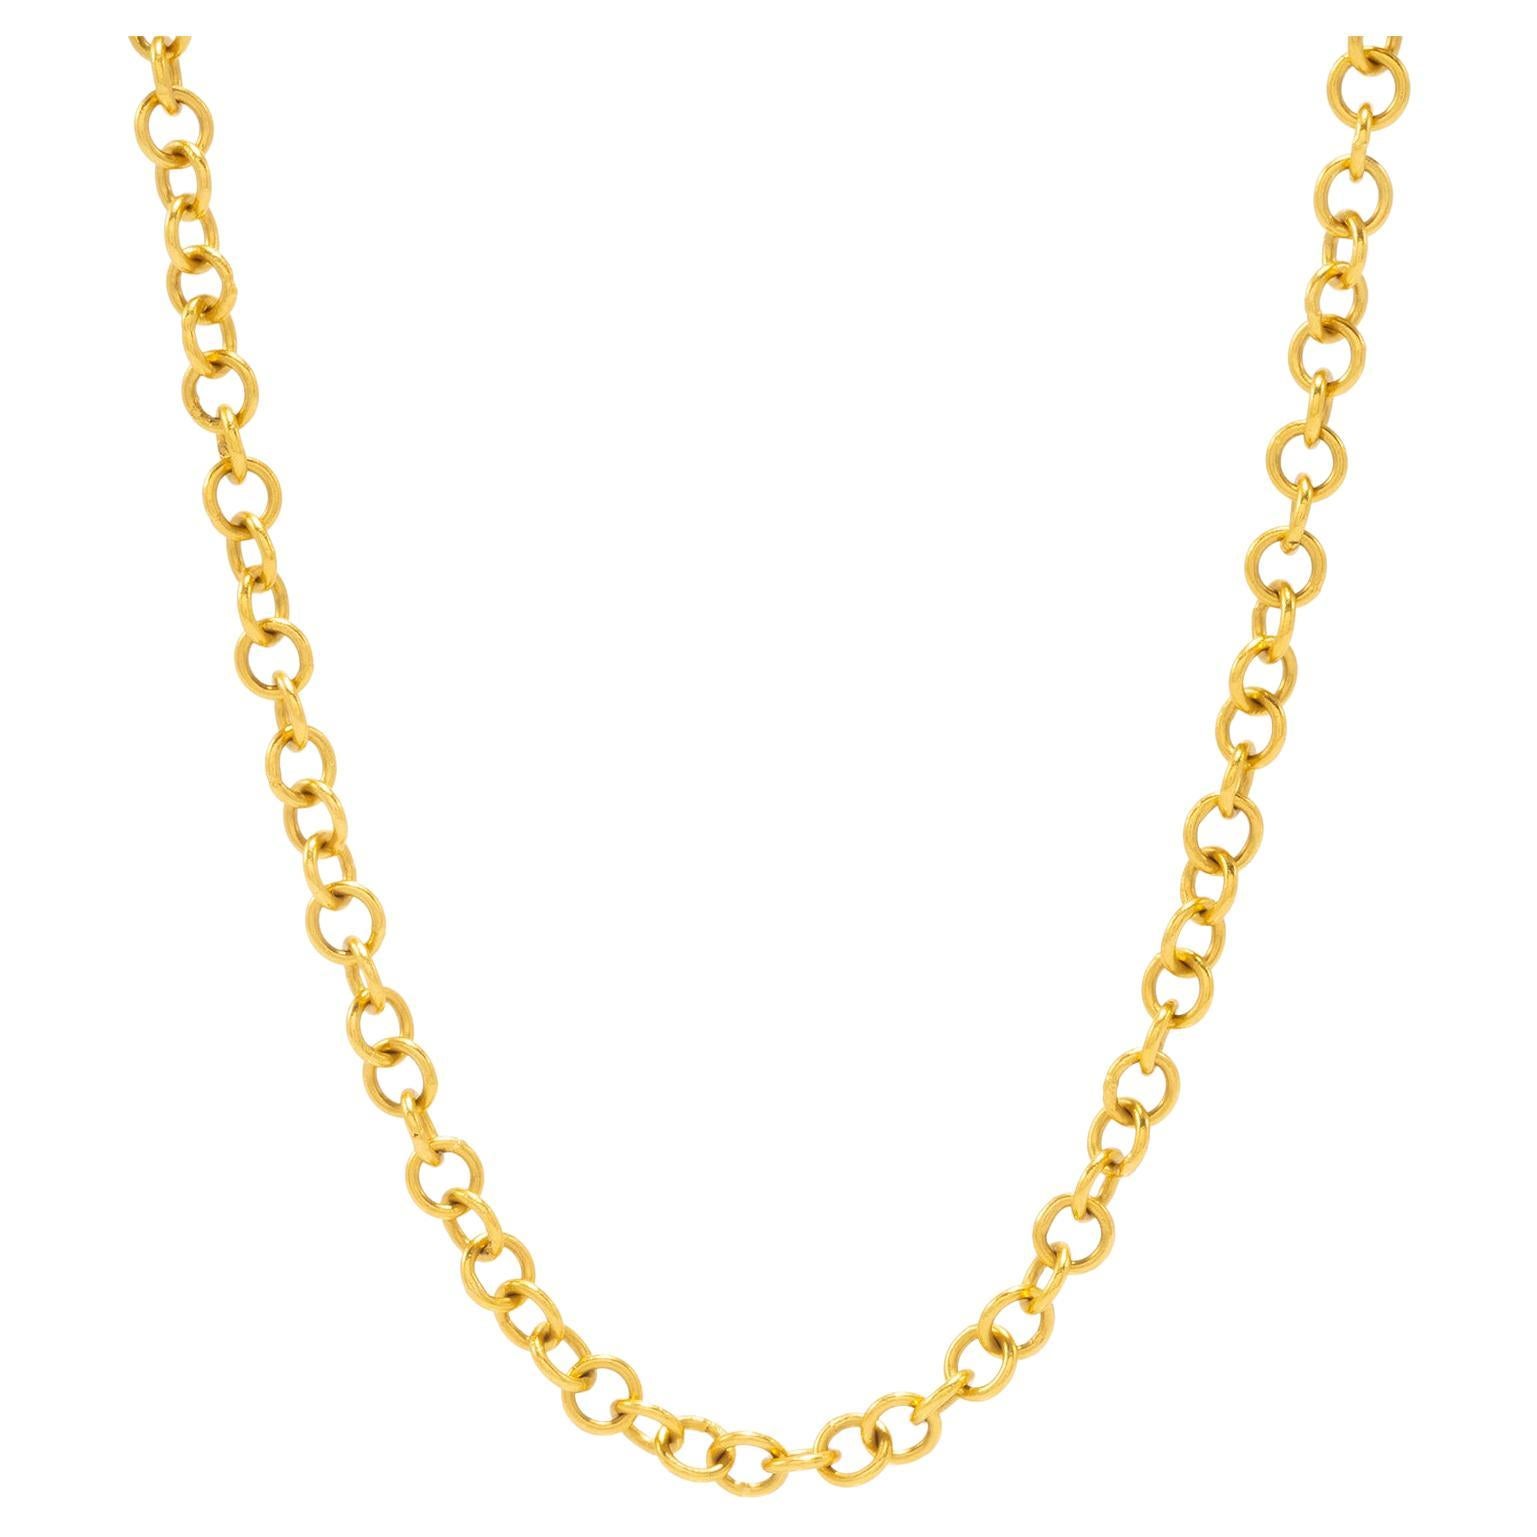 22k Gold Handmade Cable Chain 24" long, by Tagili Designs For Sale